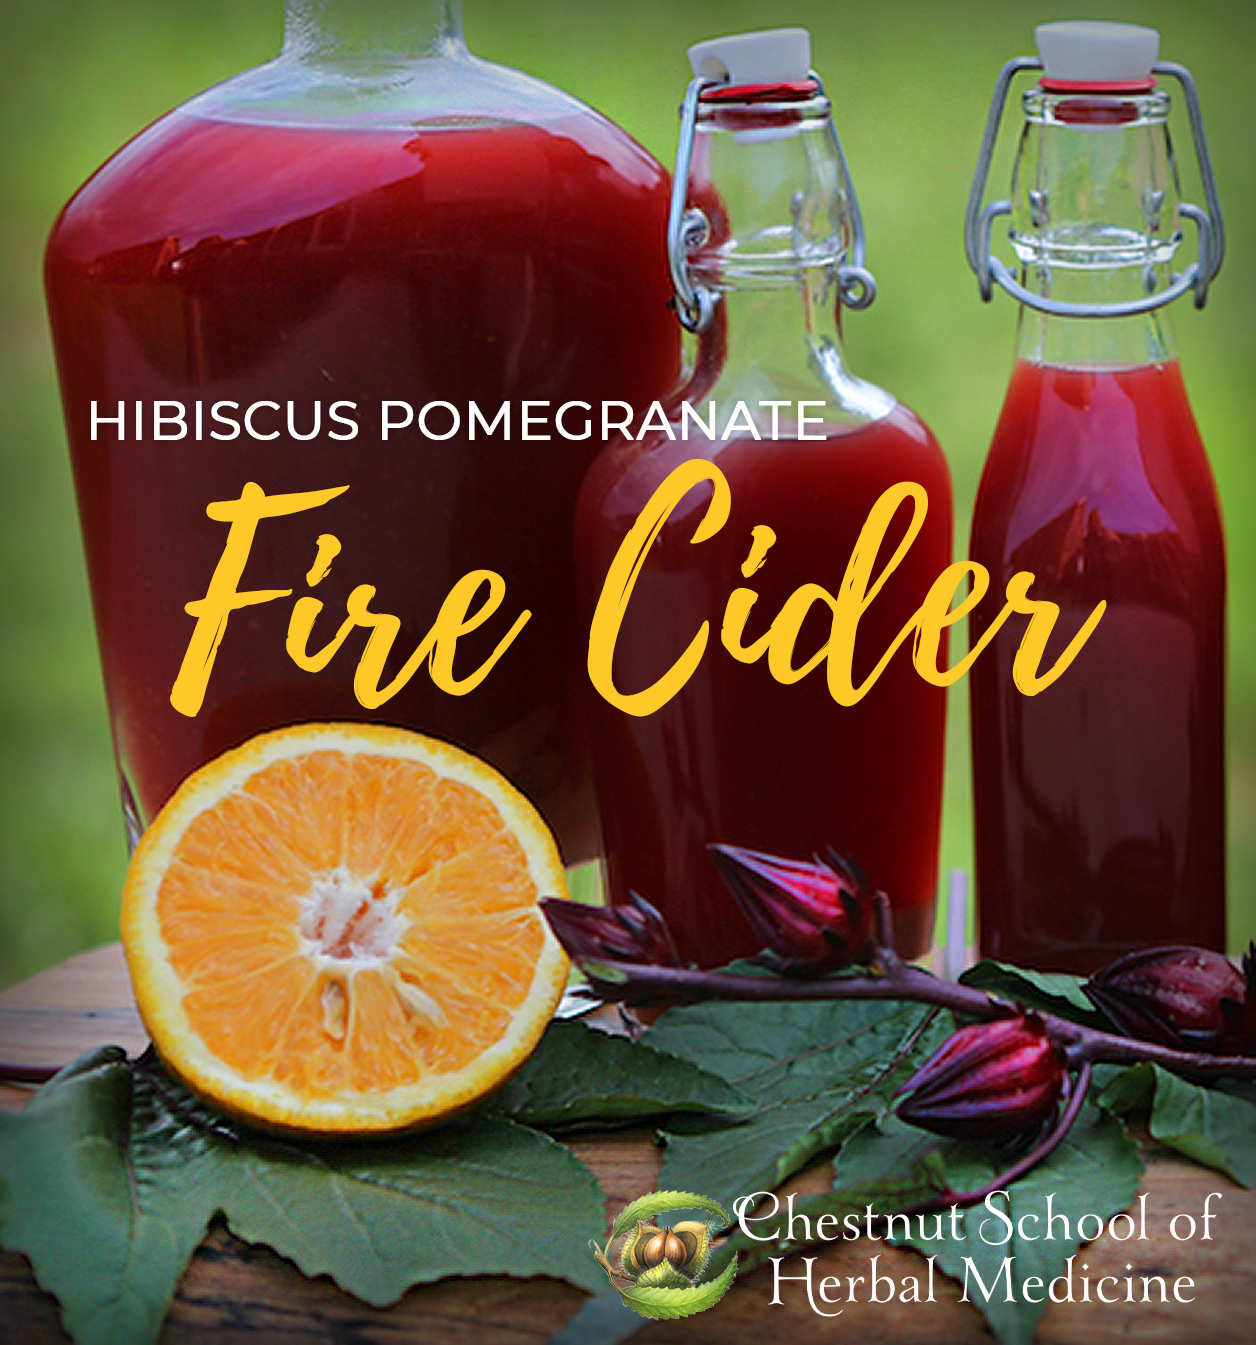 Three bottles of Hibiscus Pomegranate Fire Cider sit on a table with half an orange and fresh hibiscus flowers.